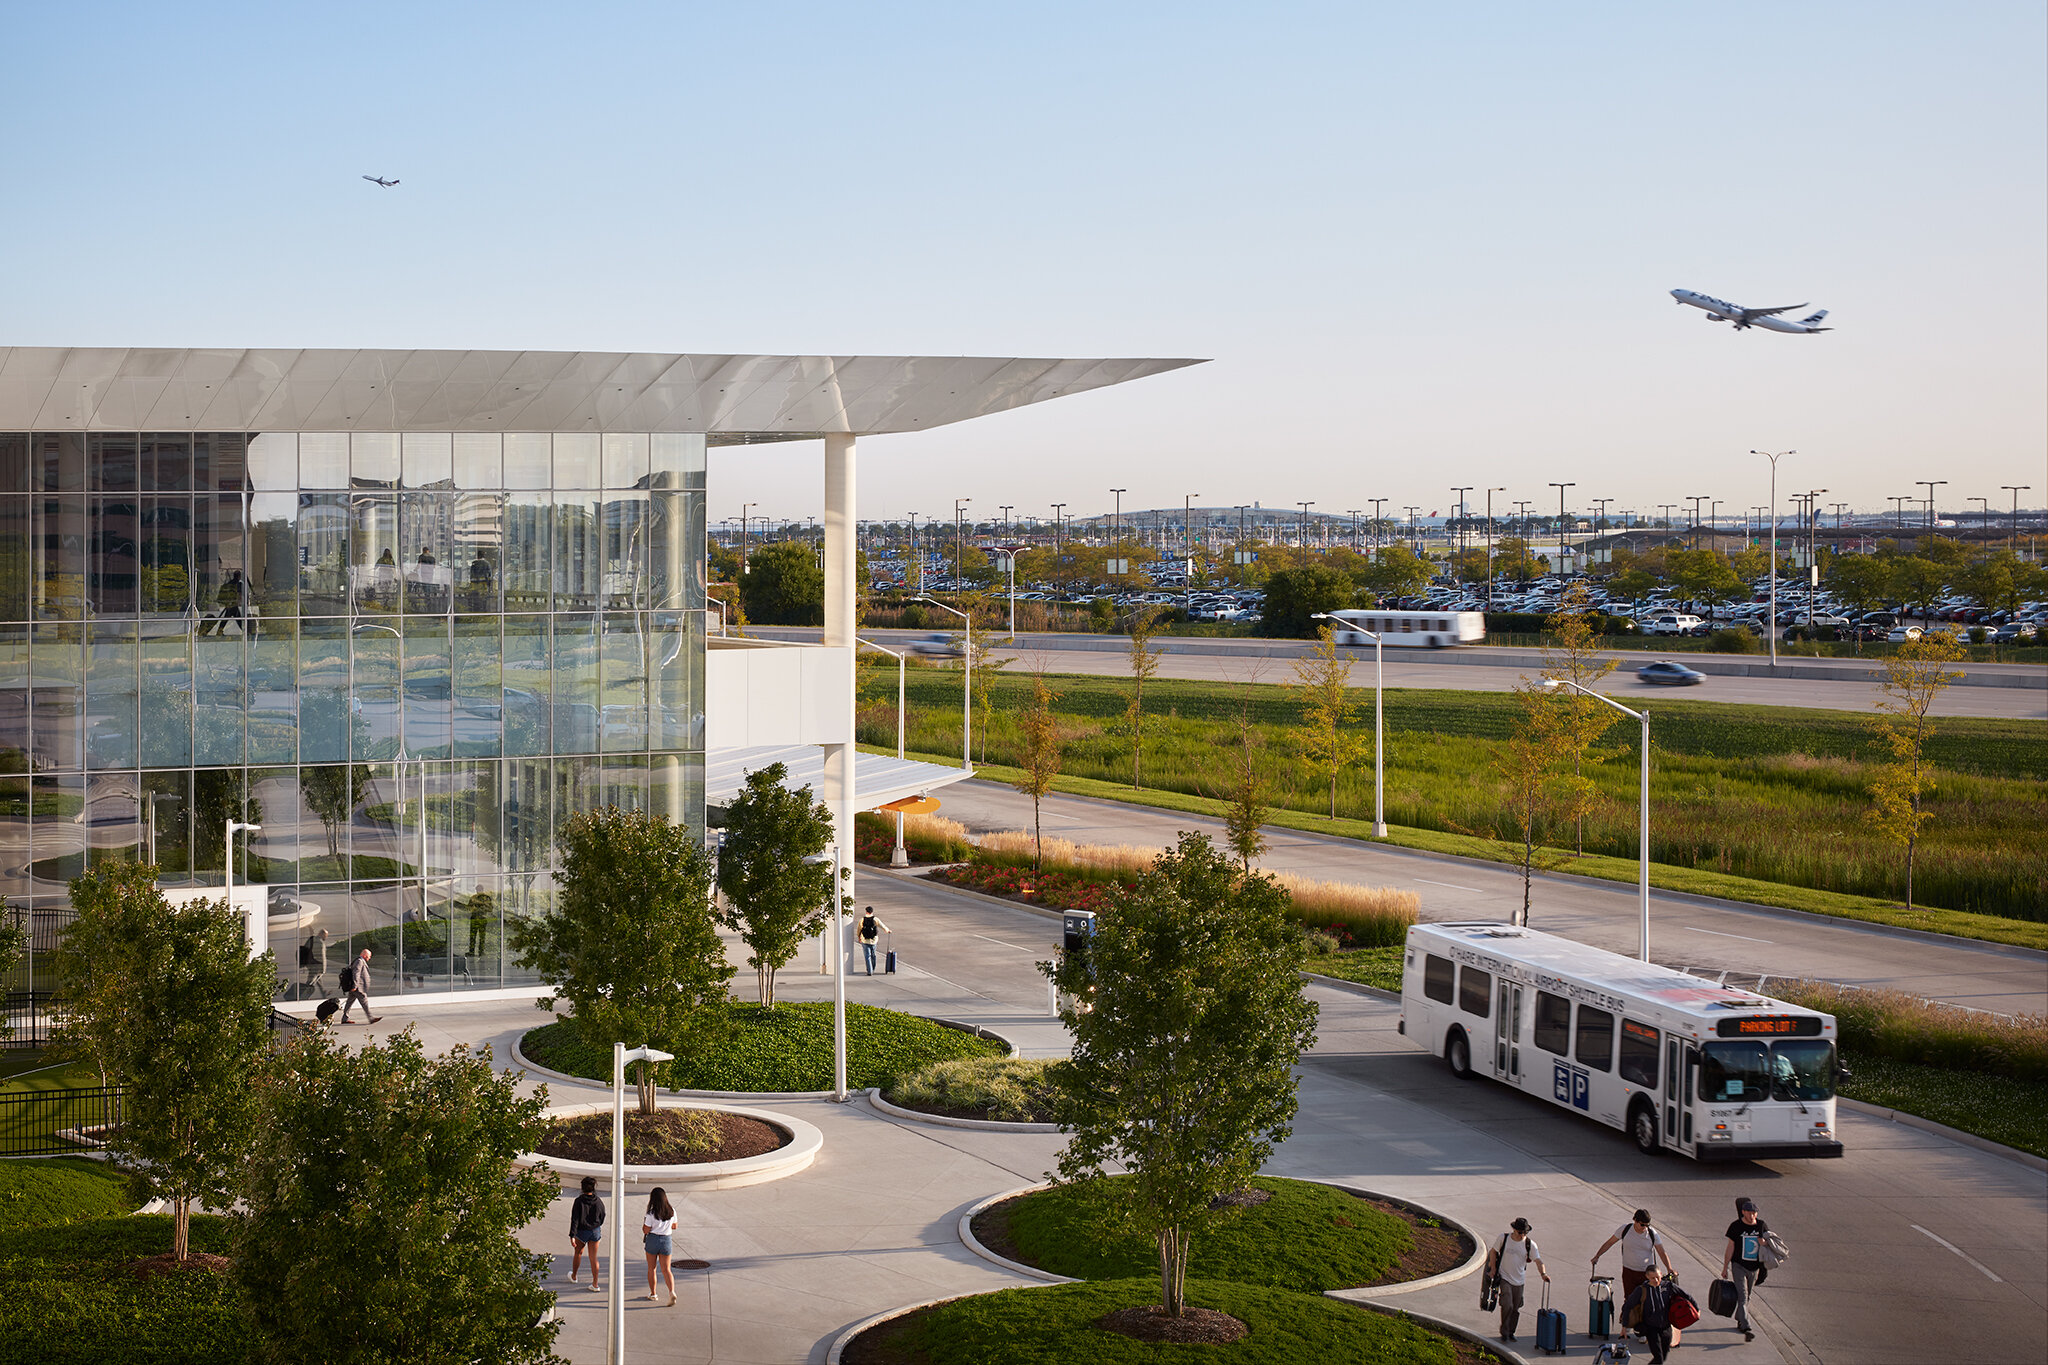  O’Hare Consolidated Car Rental Facility  Ross Barney Architects  Chicago, IL     Return to Projects  